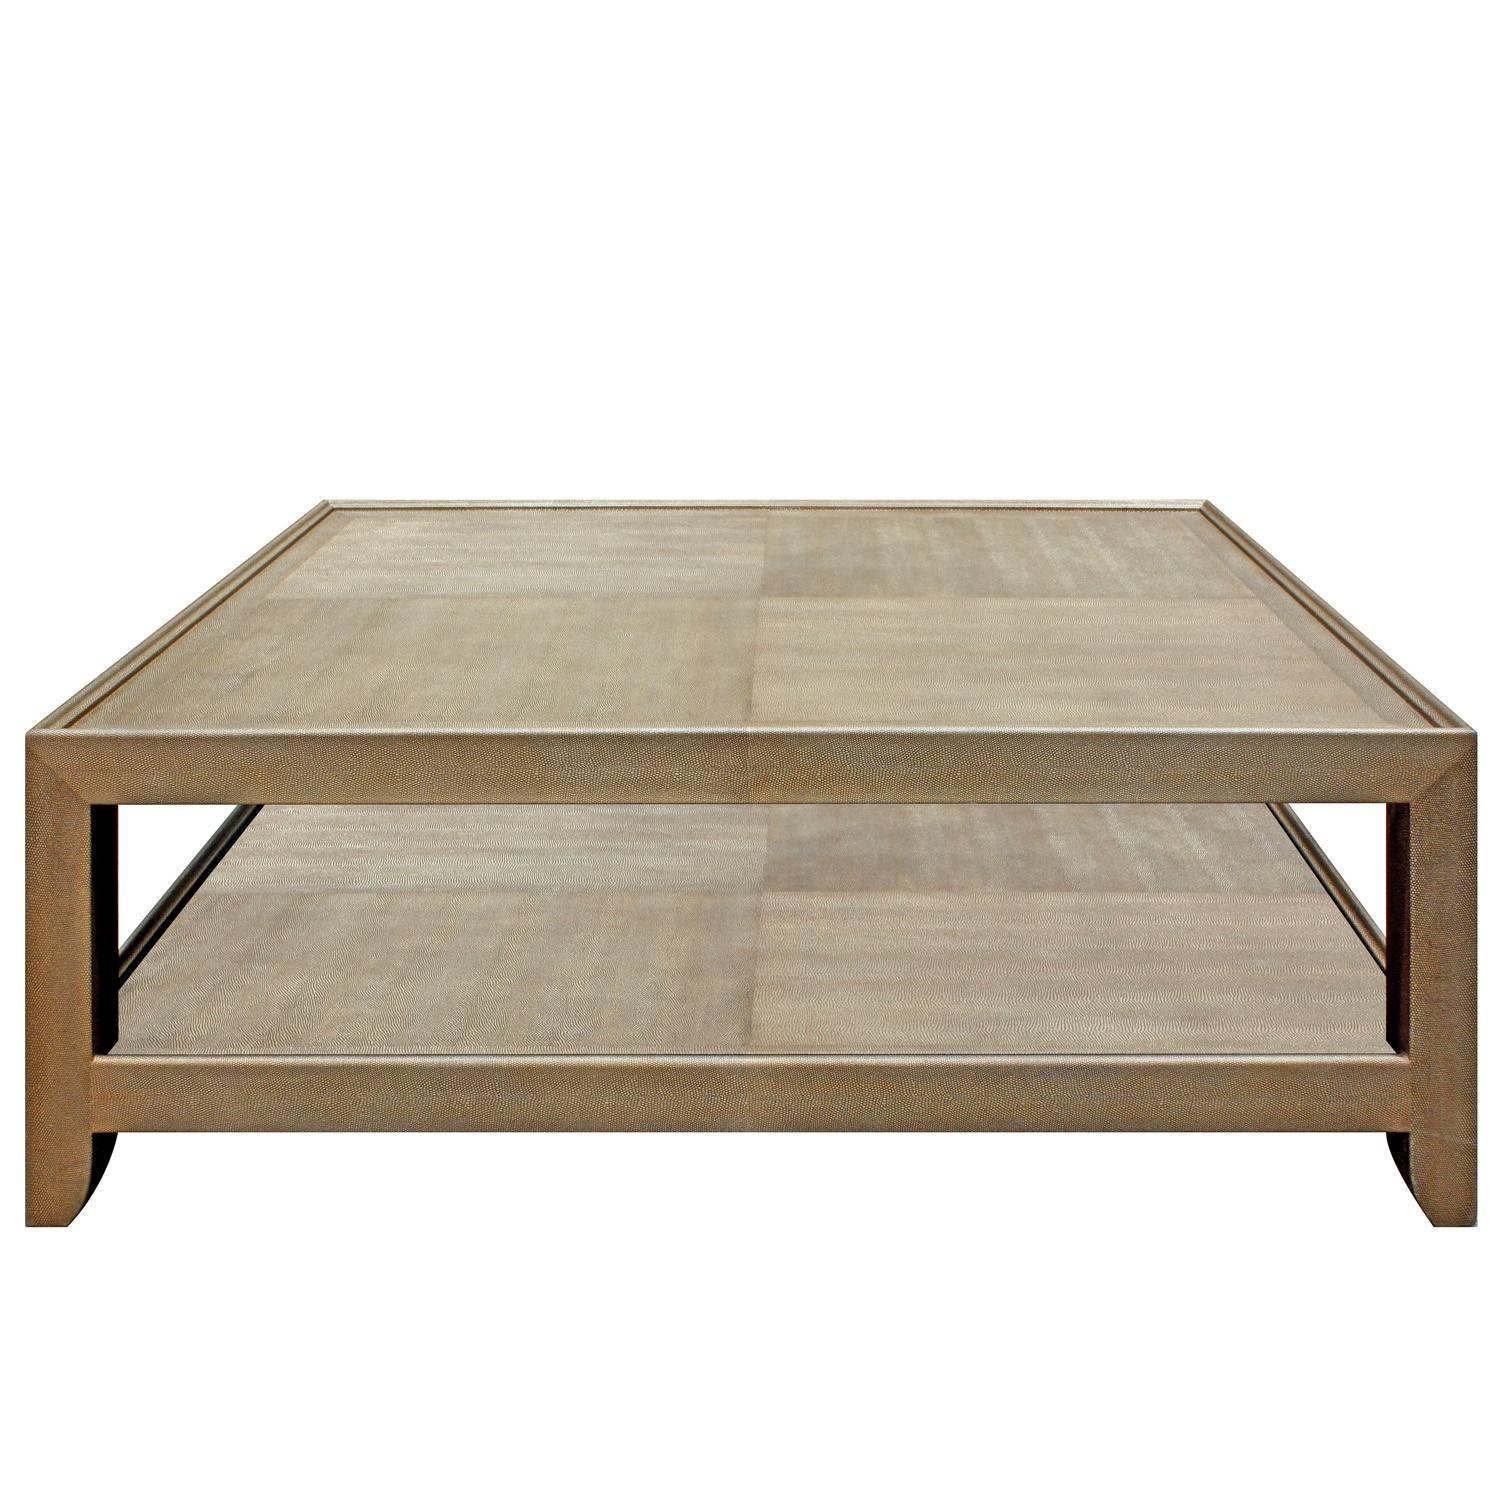 "Windsor Coffee Table" by Mary Forssberg, Custom-Made